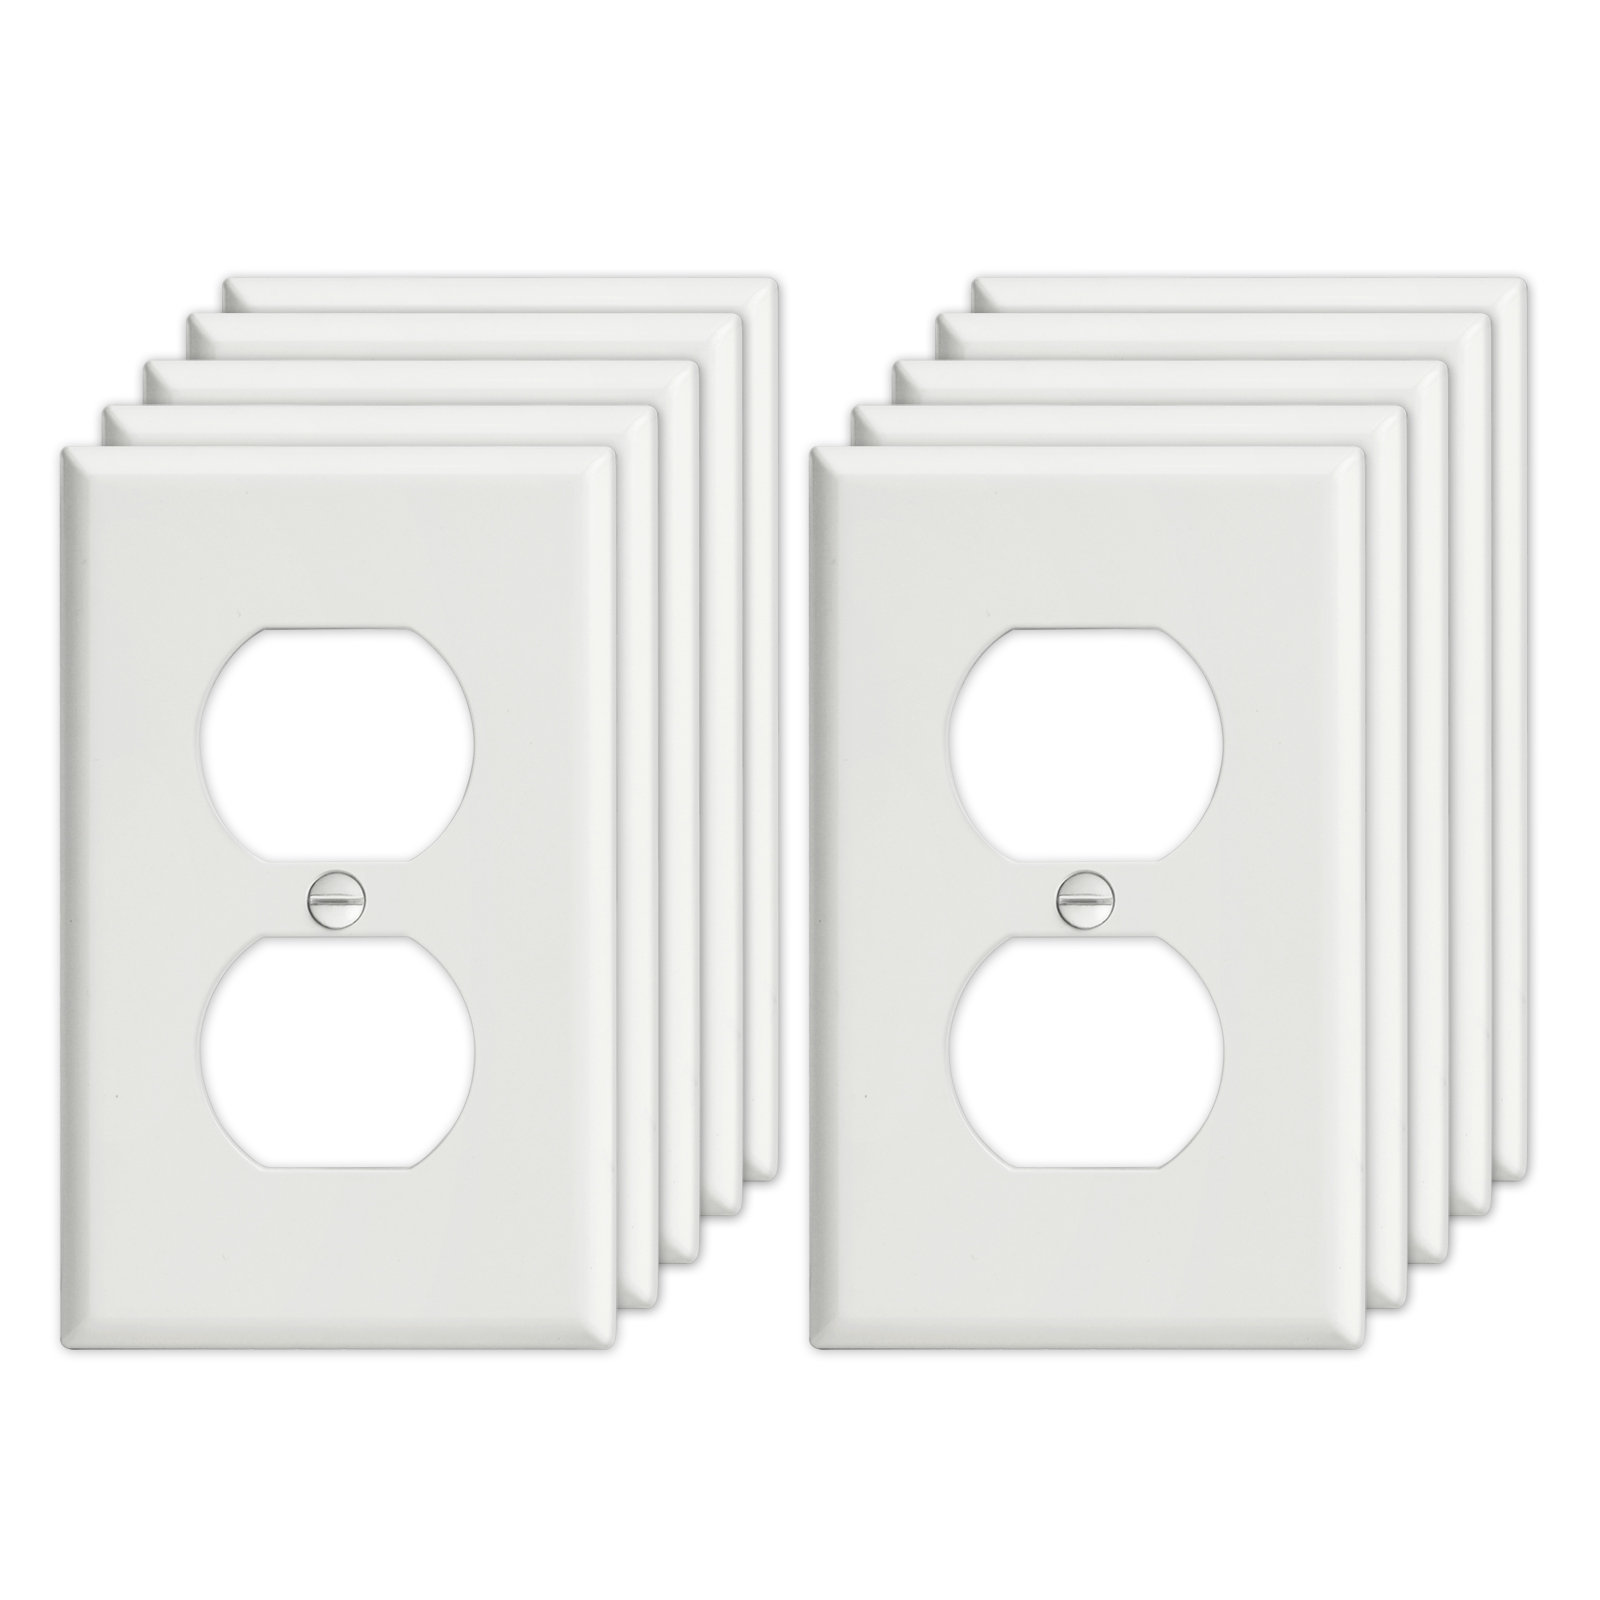 UCOMEN Duplex Receptacle Wall Plate, Standard Size 1 - Gang Electrical Outlet, 4.57 x 2.8, Almond 10 Pack, Brown